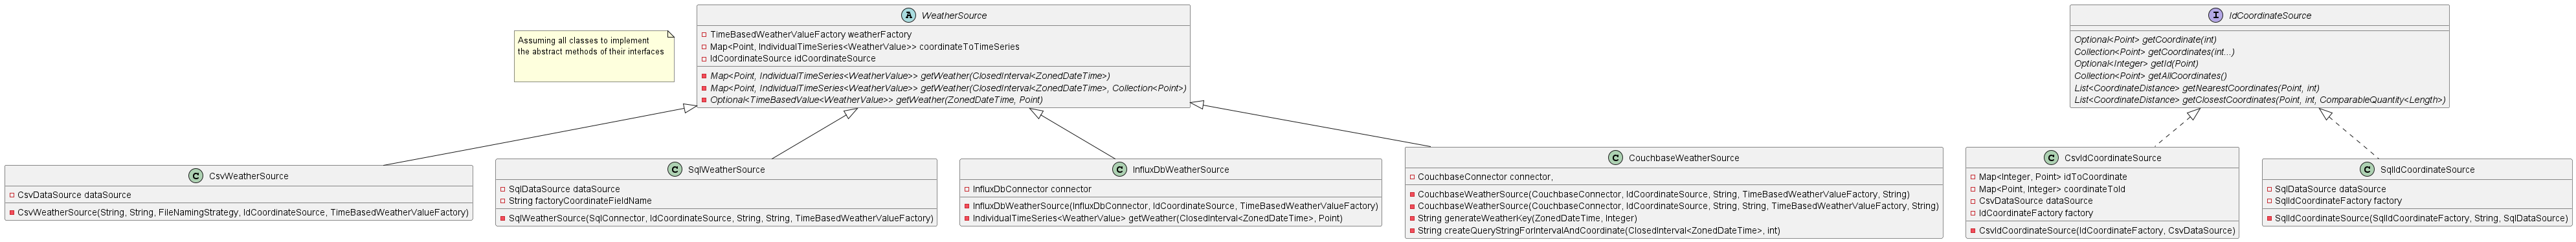 Class diagram of weather and coordinate sources